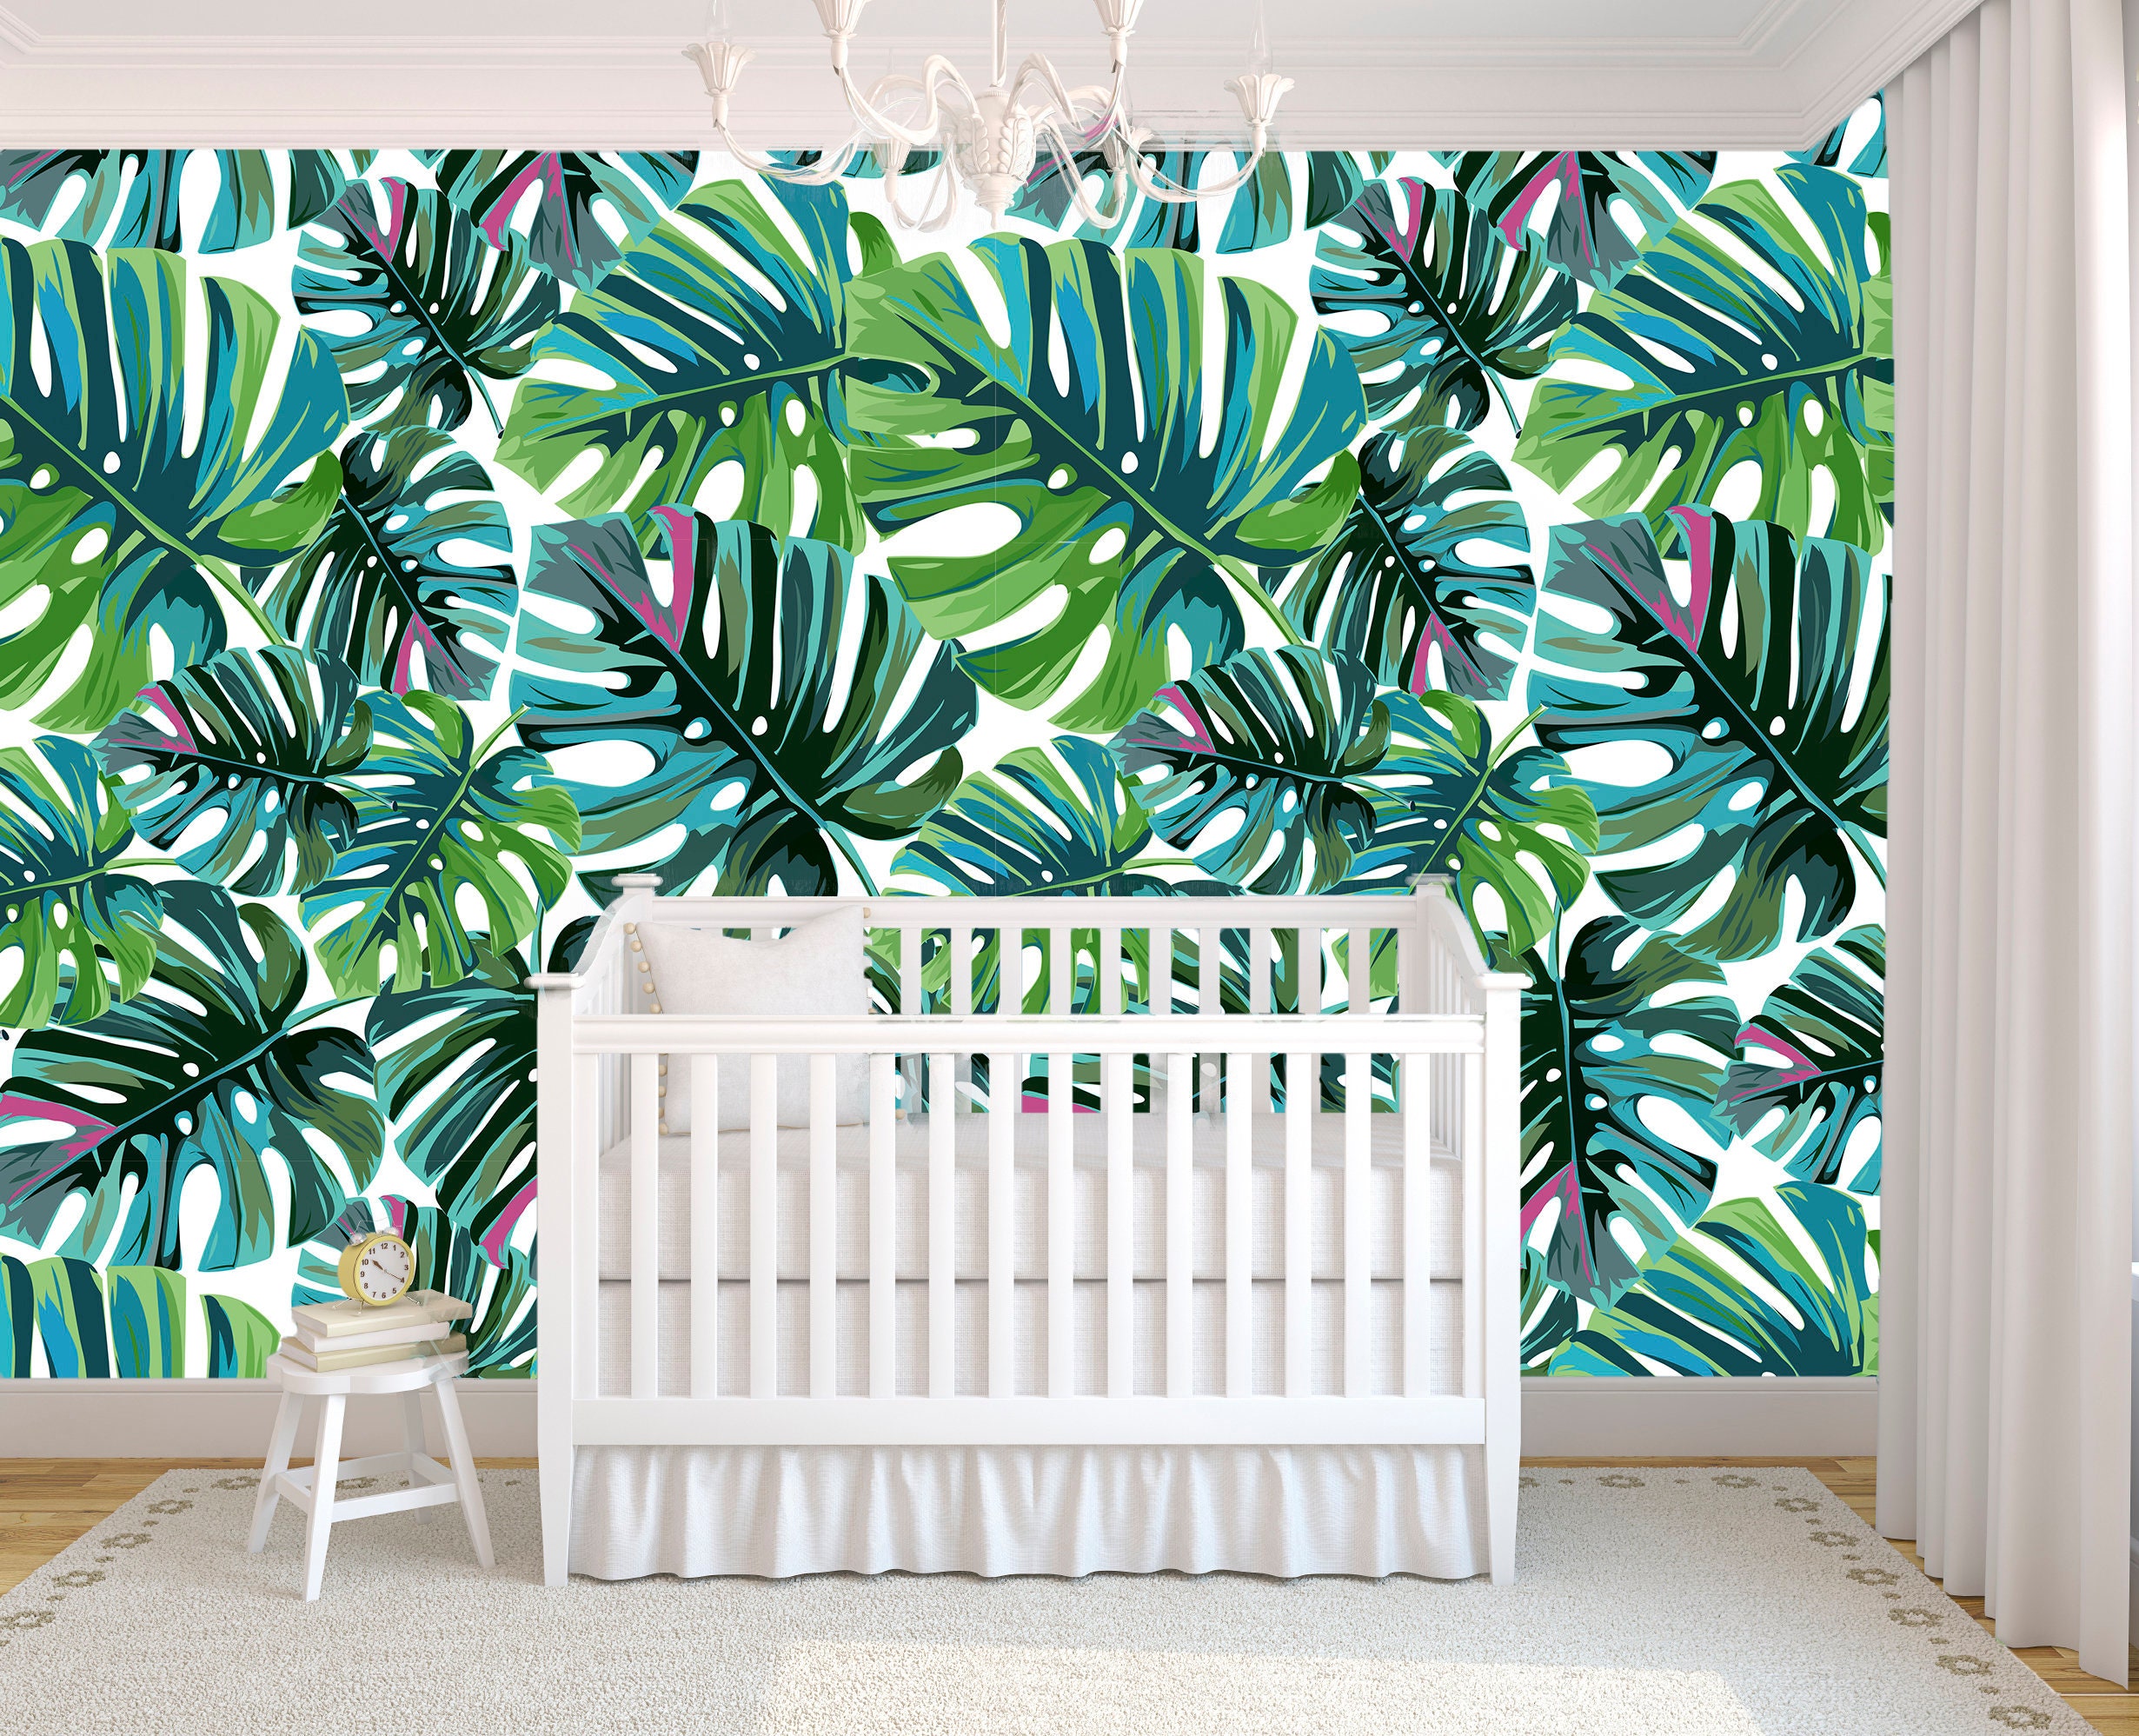 Tropical Palm Leaves Removable Wallpaper Mural Floral Peel | Etsy